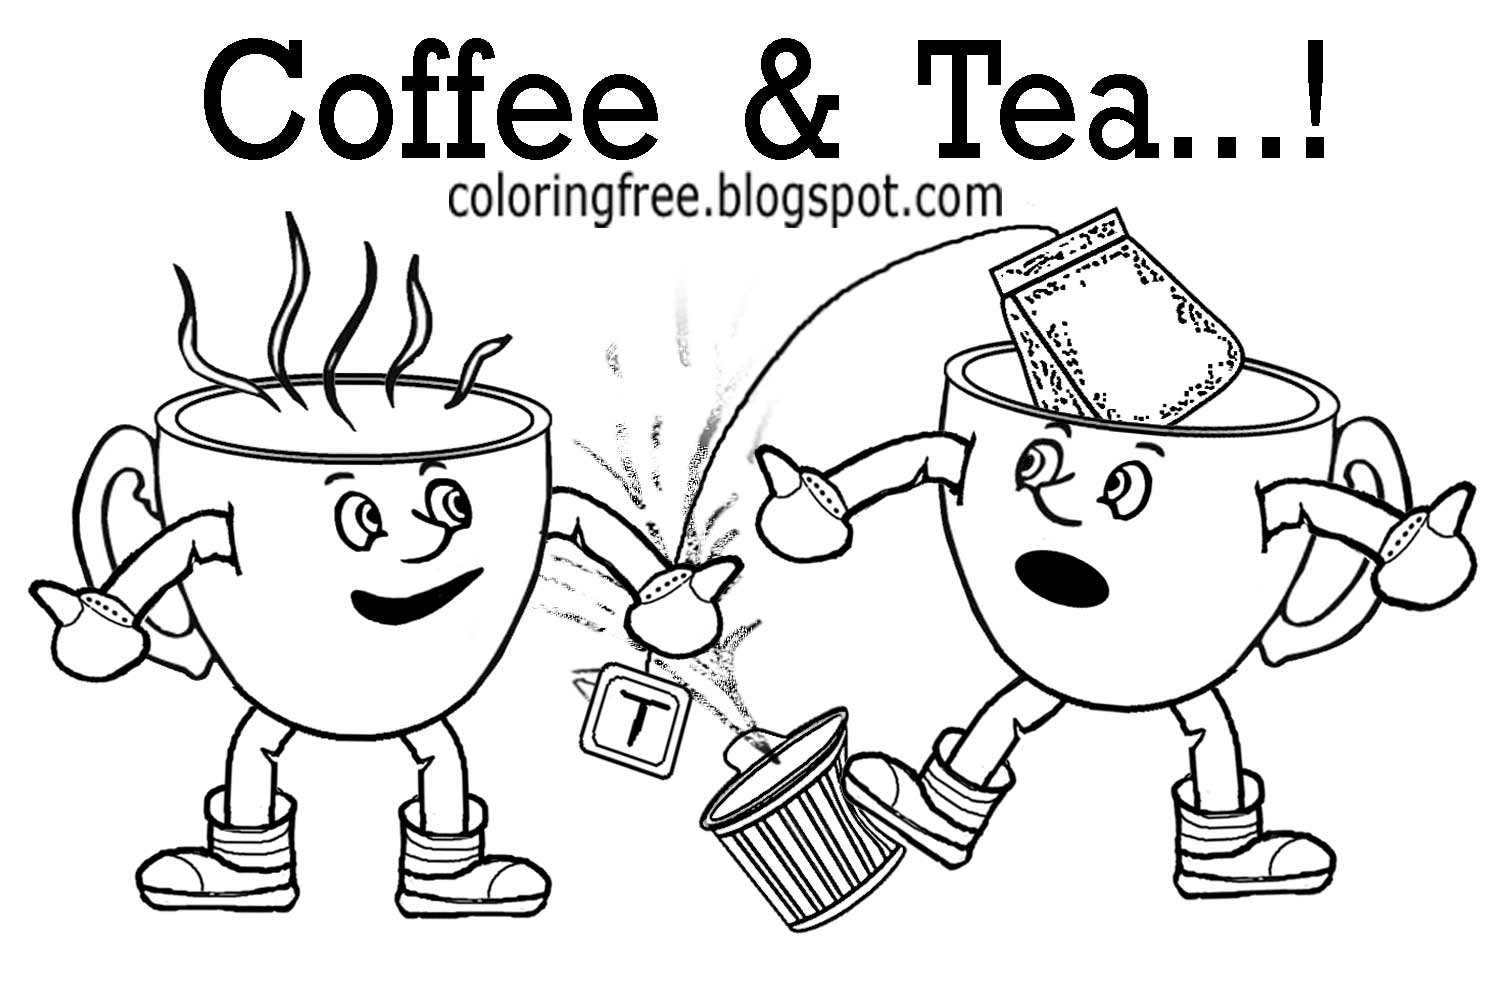 free-coloring-pages-printable-pictures-to-color-kids-drawing-ideas-color-online-free-tea-coffee